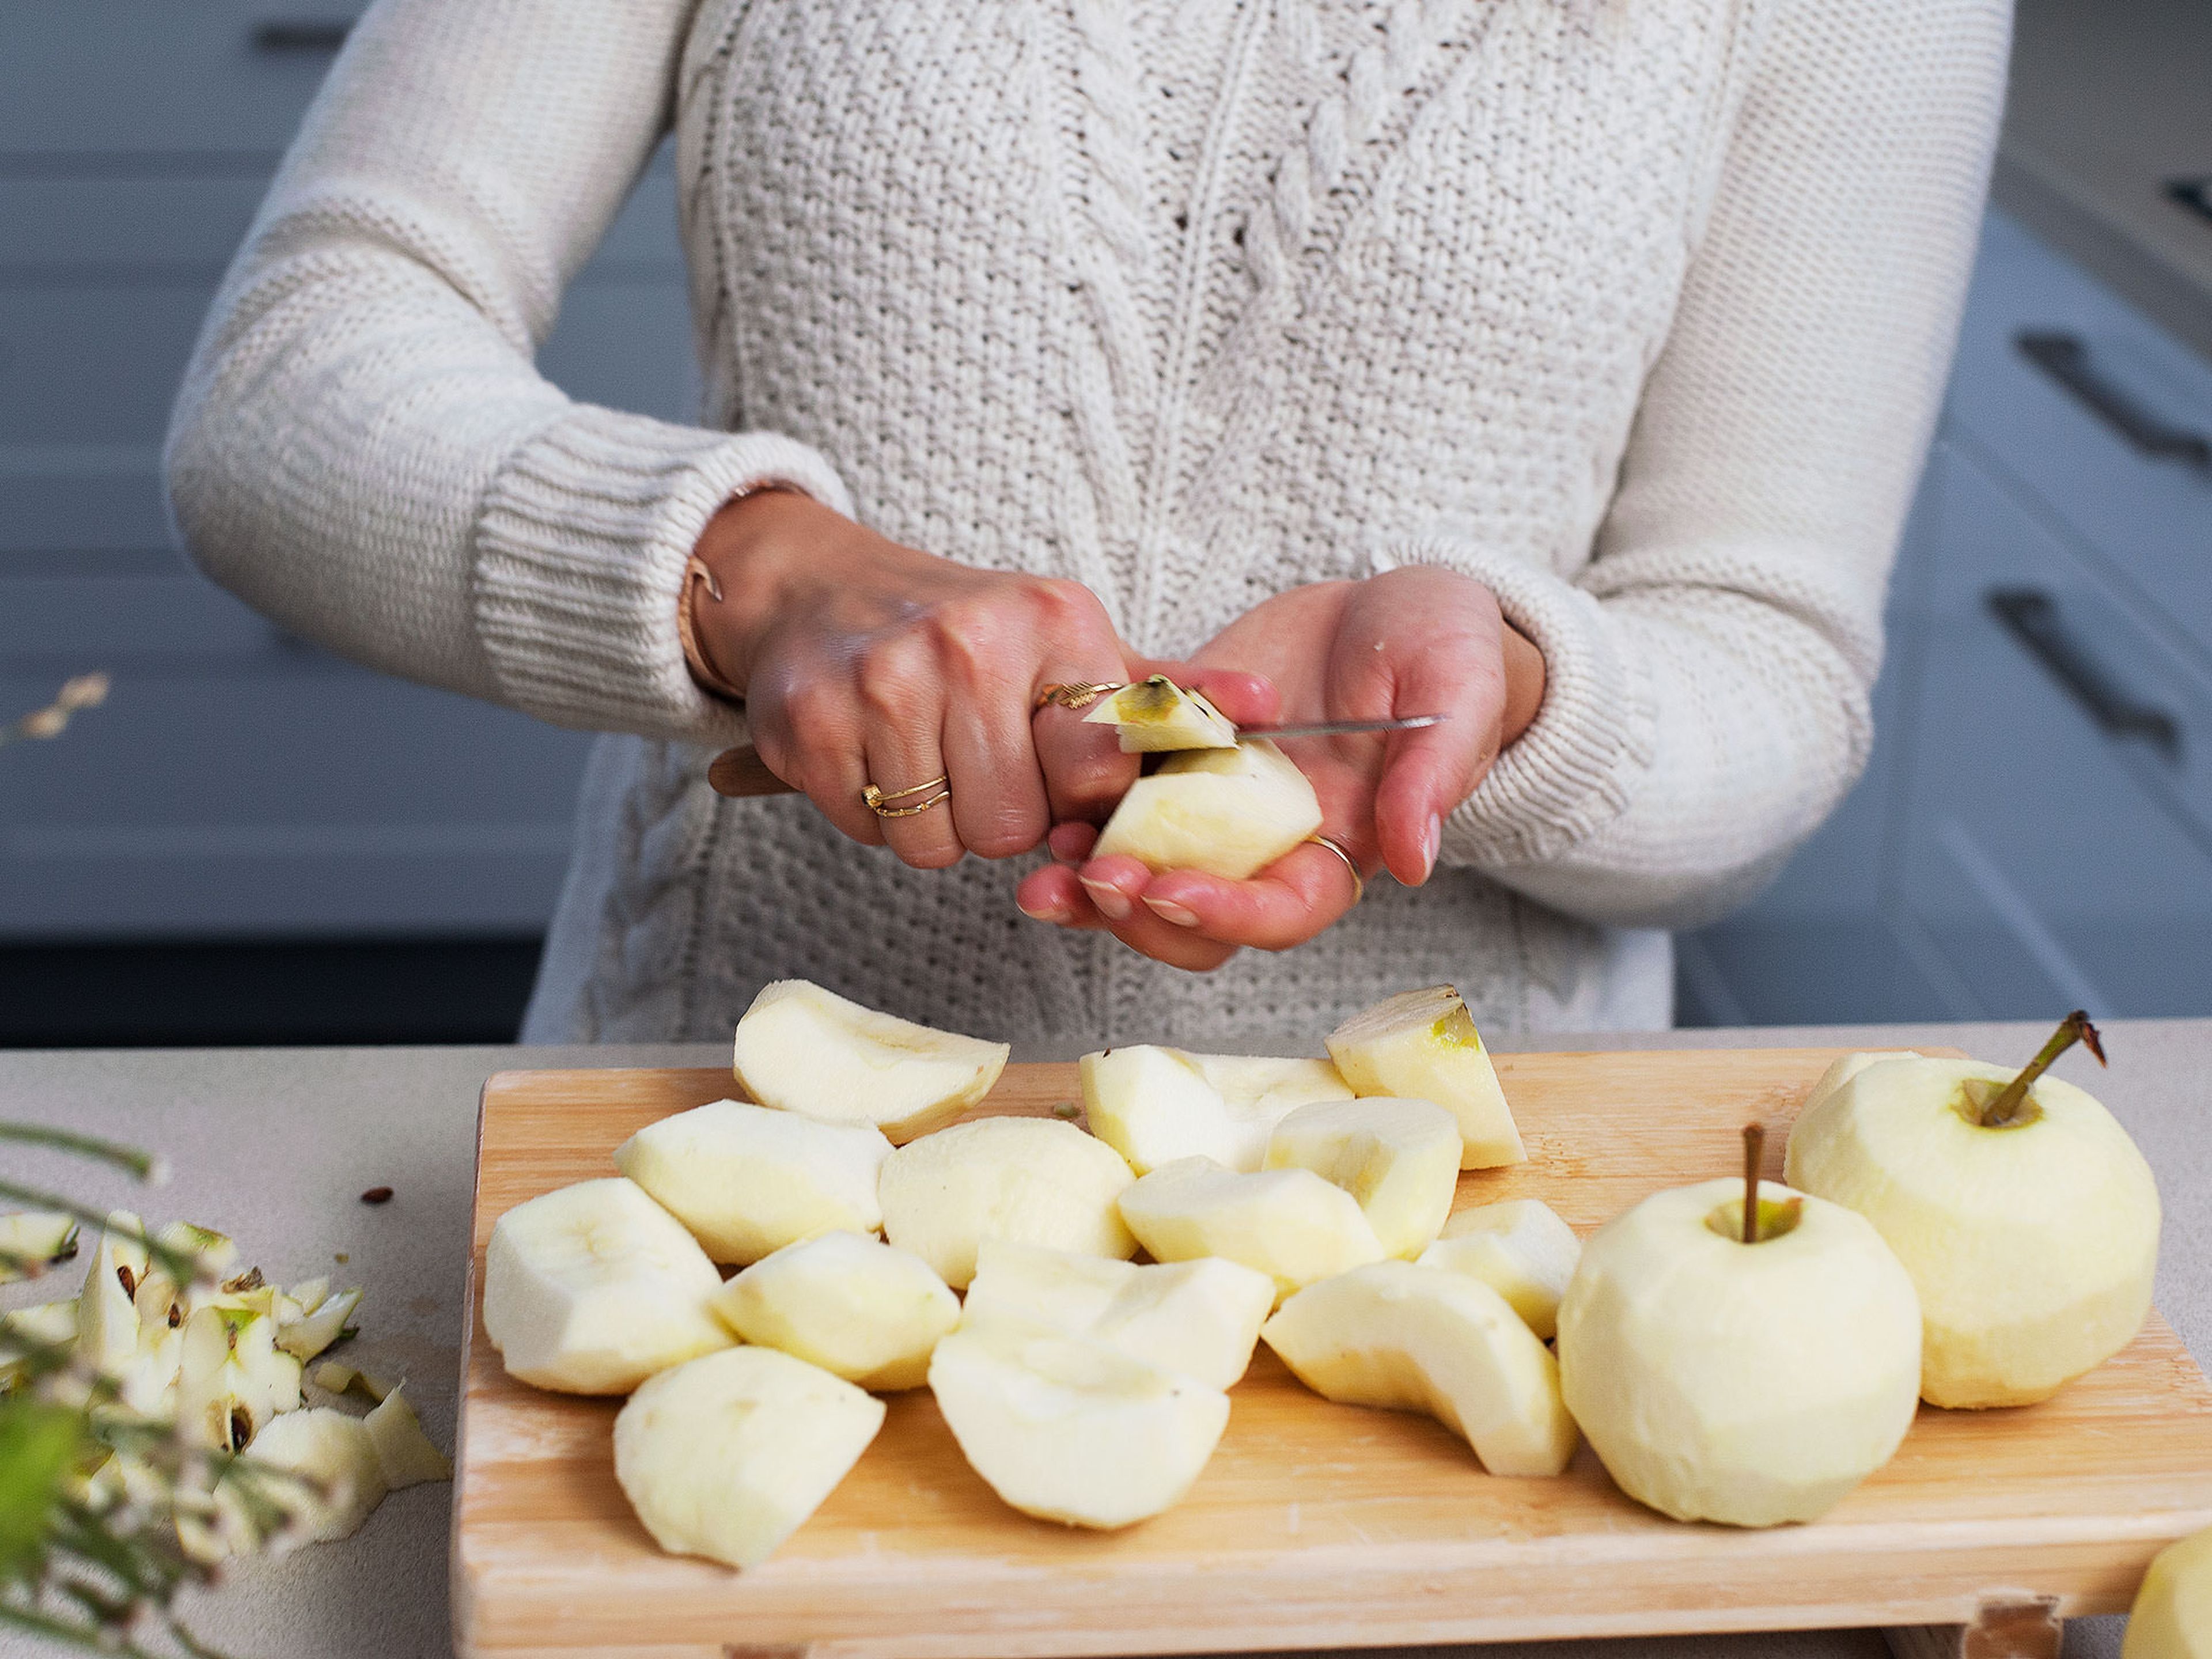 For the filling, peel and quarter apples. Remove core and slice.